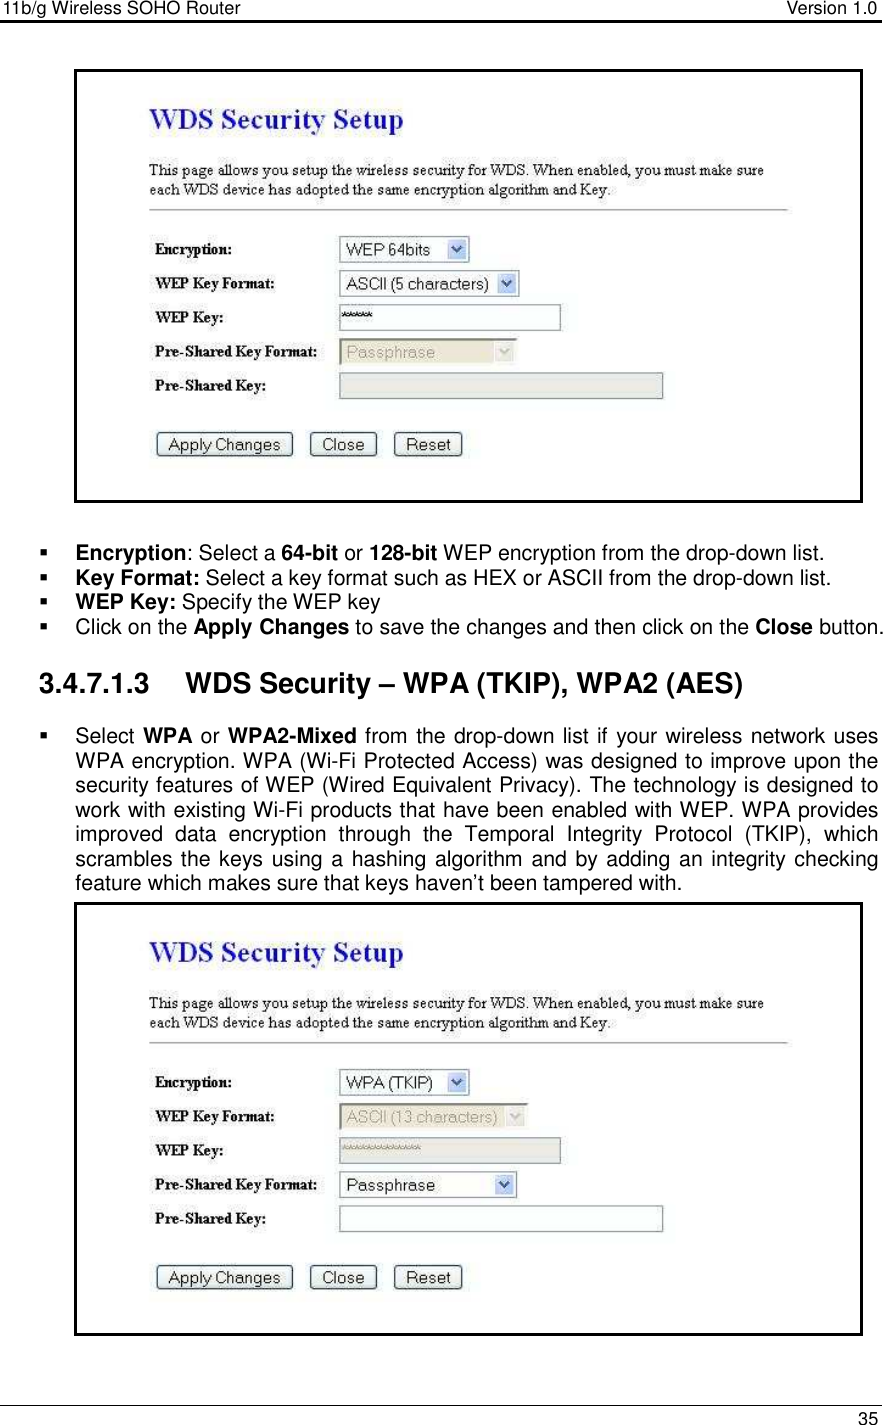 11b/g Wireless SOHO Router                                     Version 1.0    35                      Encryption: Select a 64-bit or 128-bit WEP encryption from the drop-down list.   Key Format: Select a key format such as HEX or ASCII from the drop-down list.   WEP Key: Specify the WEP key    Click on the Apply Changes to save the changes and then click on the Close button.   3.4.7.1.3  WDS Security – WPA (TKIP), WPA2 (AES)    Select WPA or WPA2-Mixed from the drop-down list if your wireless network uses WPA encryption. WPA (Wi-Fi Protected Access) was designed to improve upon the security features of WEP (Wired Equivalent Privacy). The technology is designed to work with existing Wi-Fi products that have been enabled with WEP. WPA provides improved  data  encryption  through  the  Temporal  Integrity  Protocol  (TKIP),  which scrambles the keys using a hashing algorithm and by adding an integrity checking feature which makes sure that keys haven’t been tampered with.                    